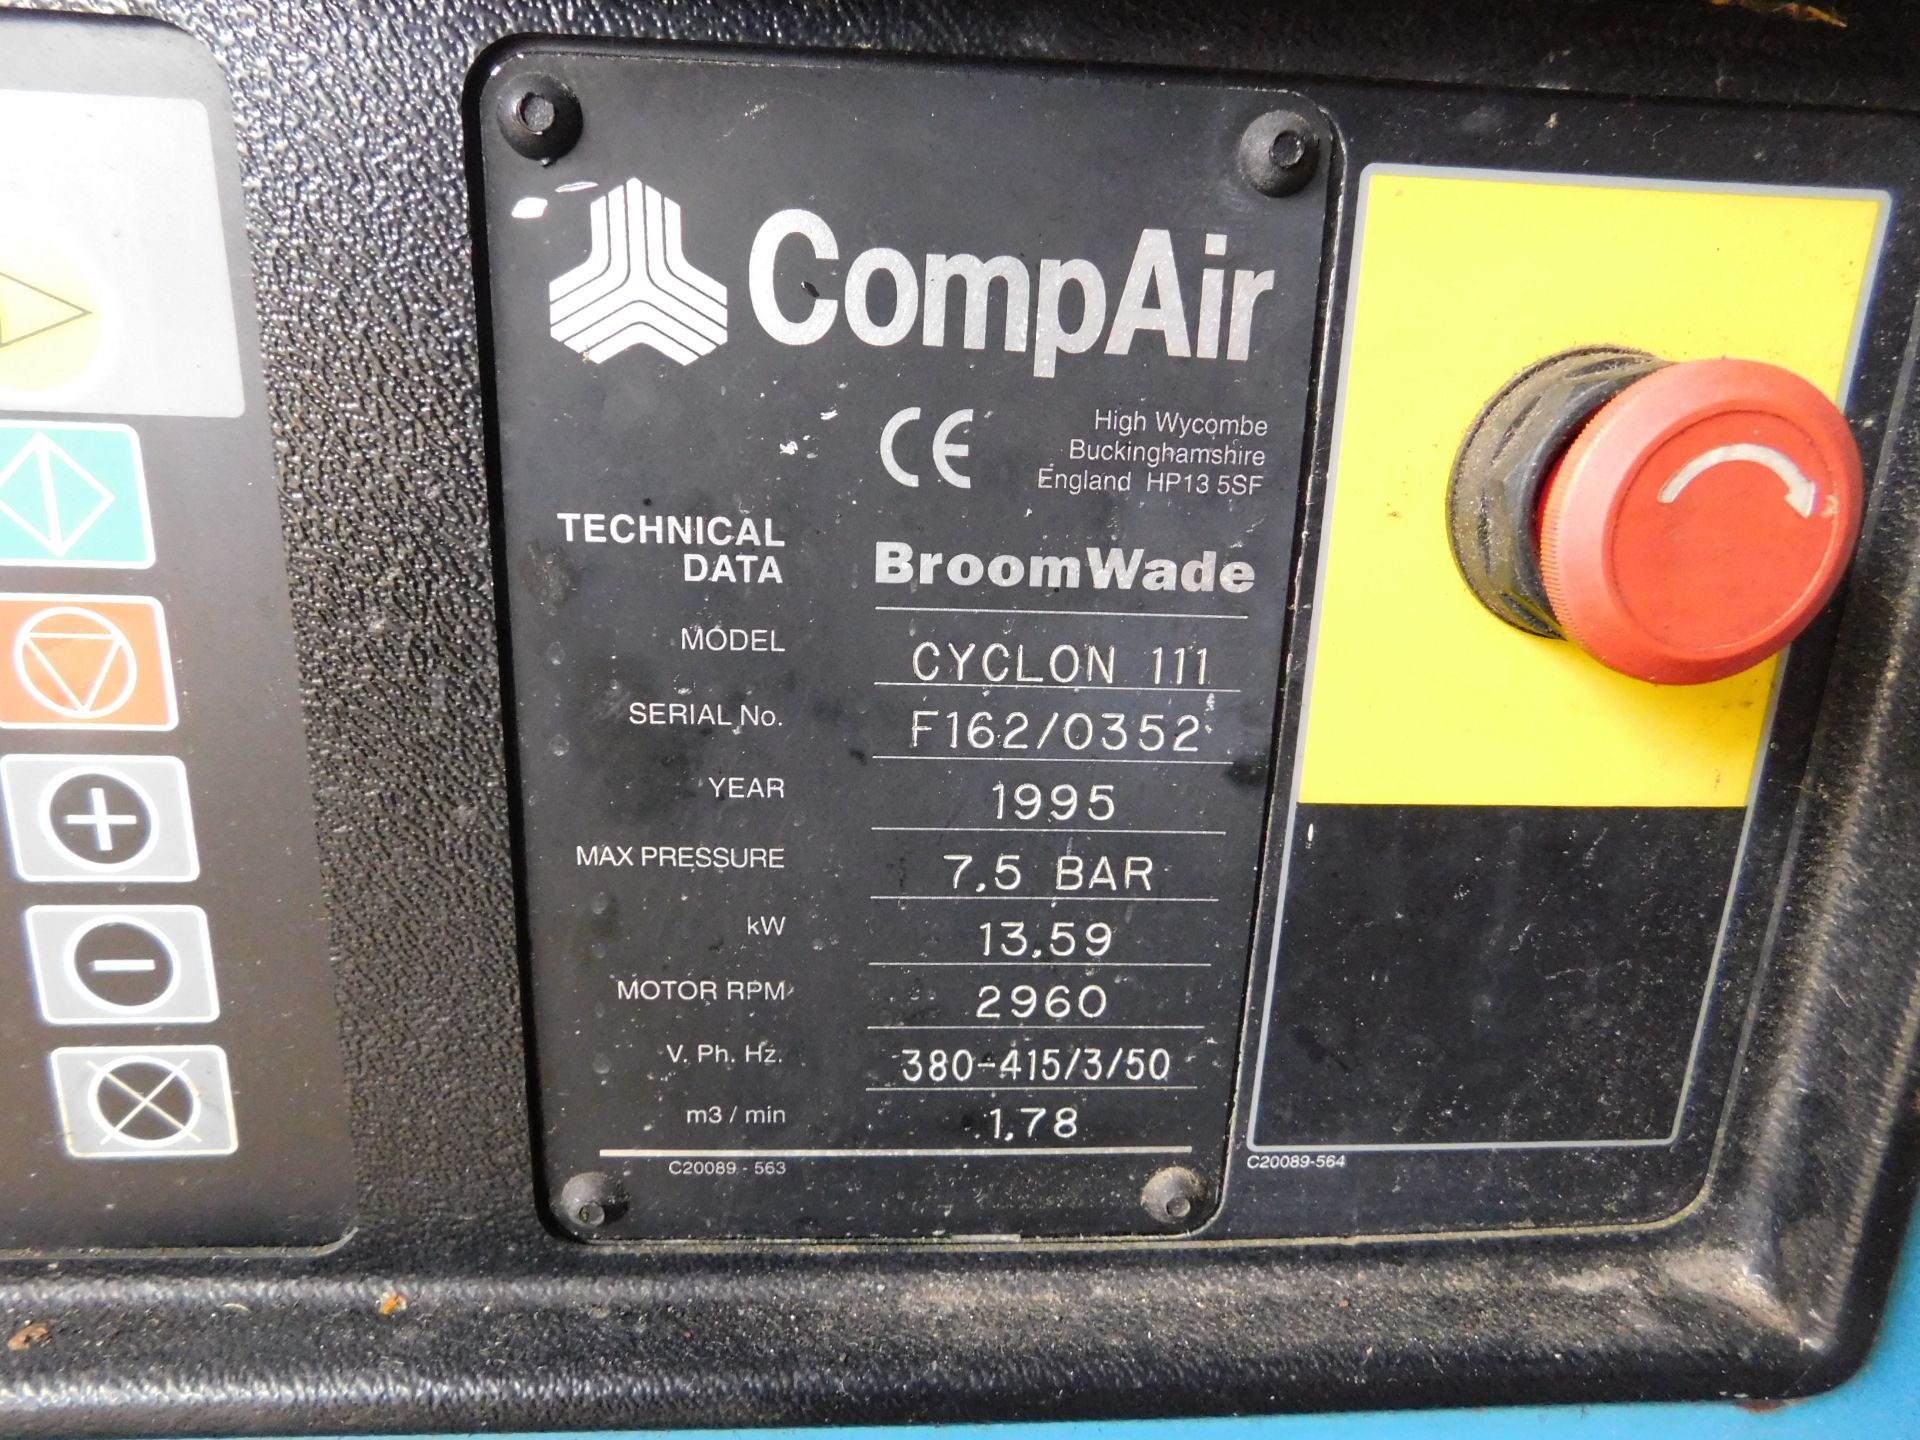 Compair Cyclon iii Broomwade Compressor, s/n F162/0352, 7.5bar (1995) with Air Dryer & Vertical - Image 3 of 7